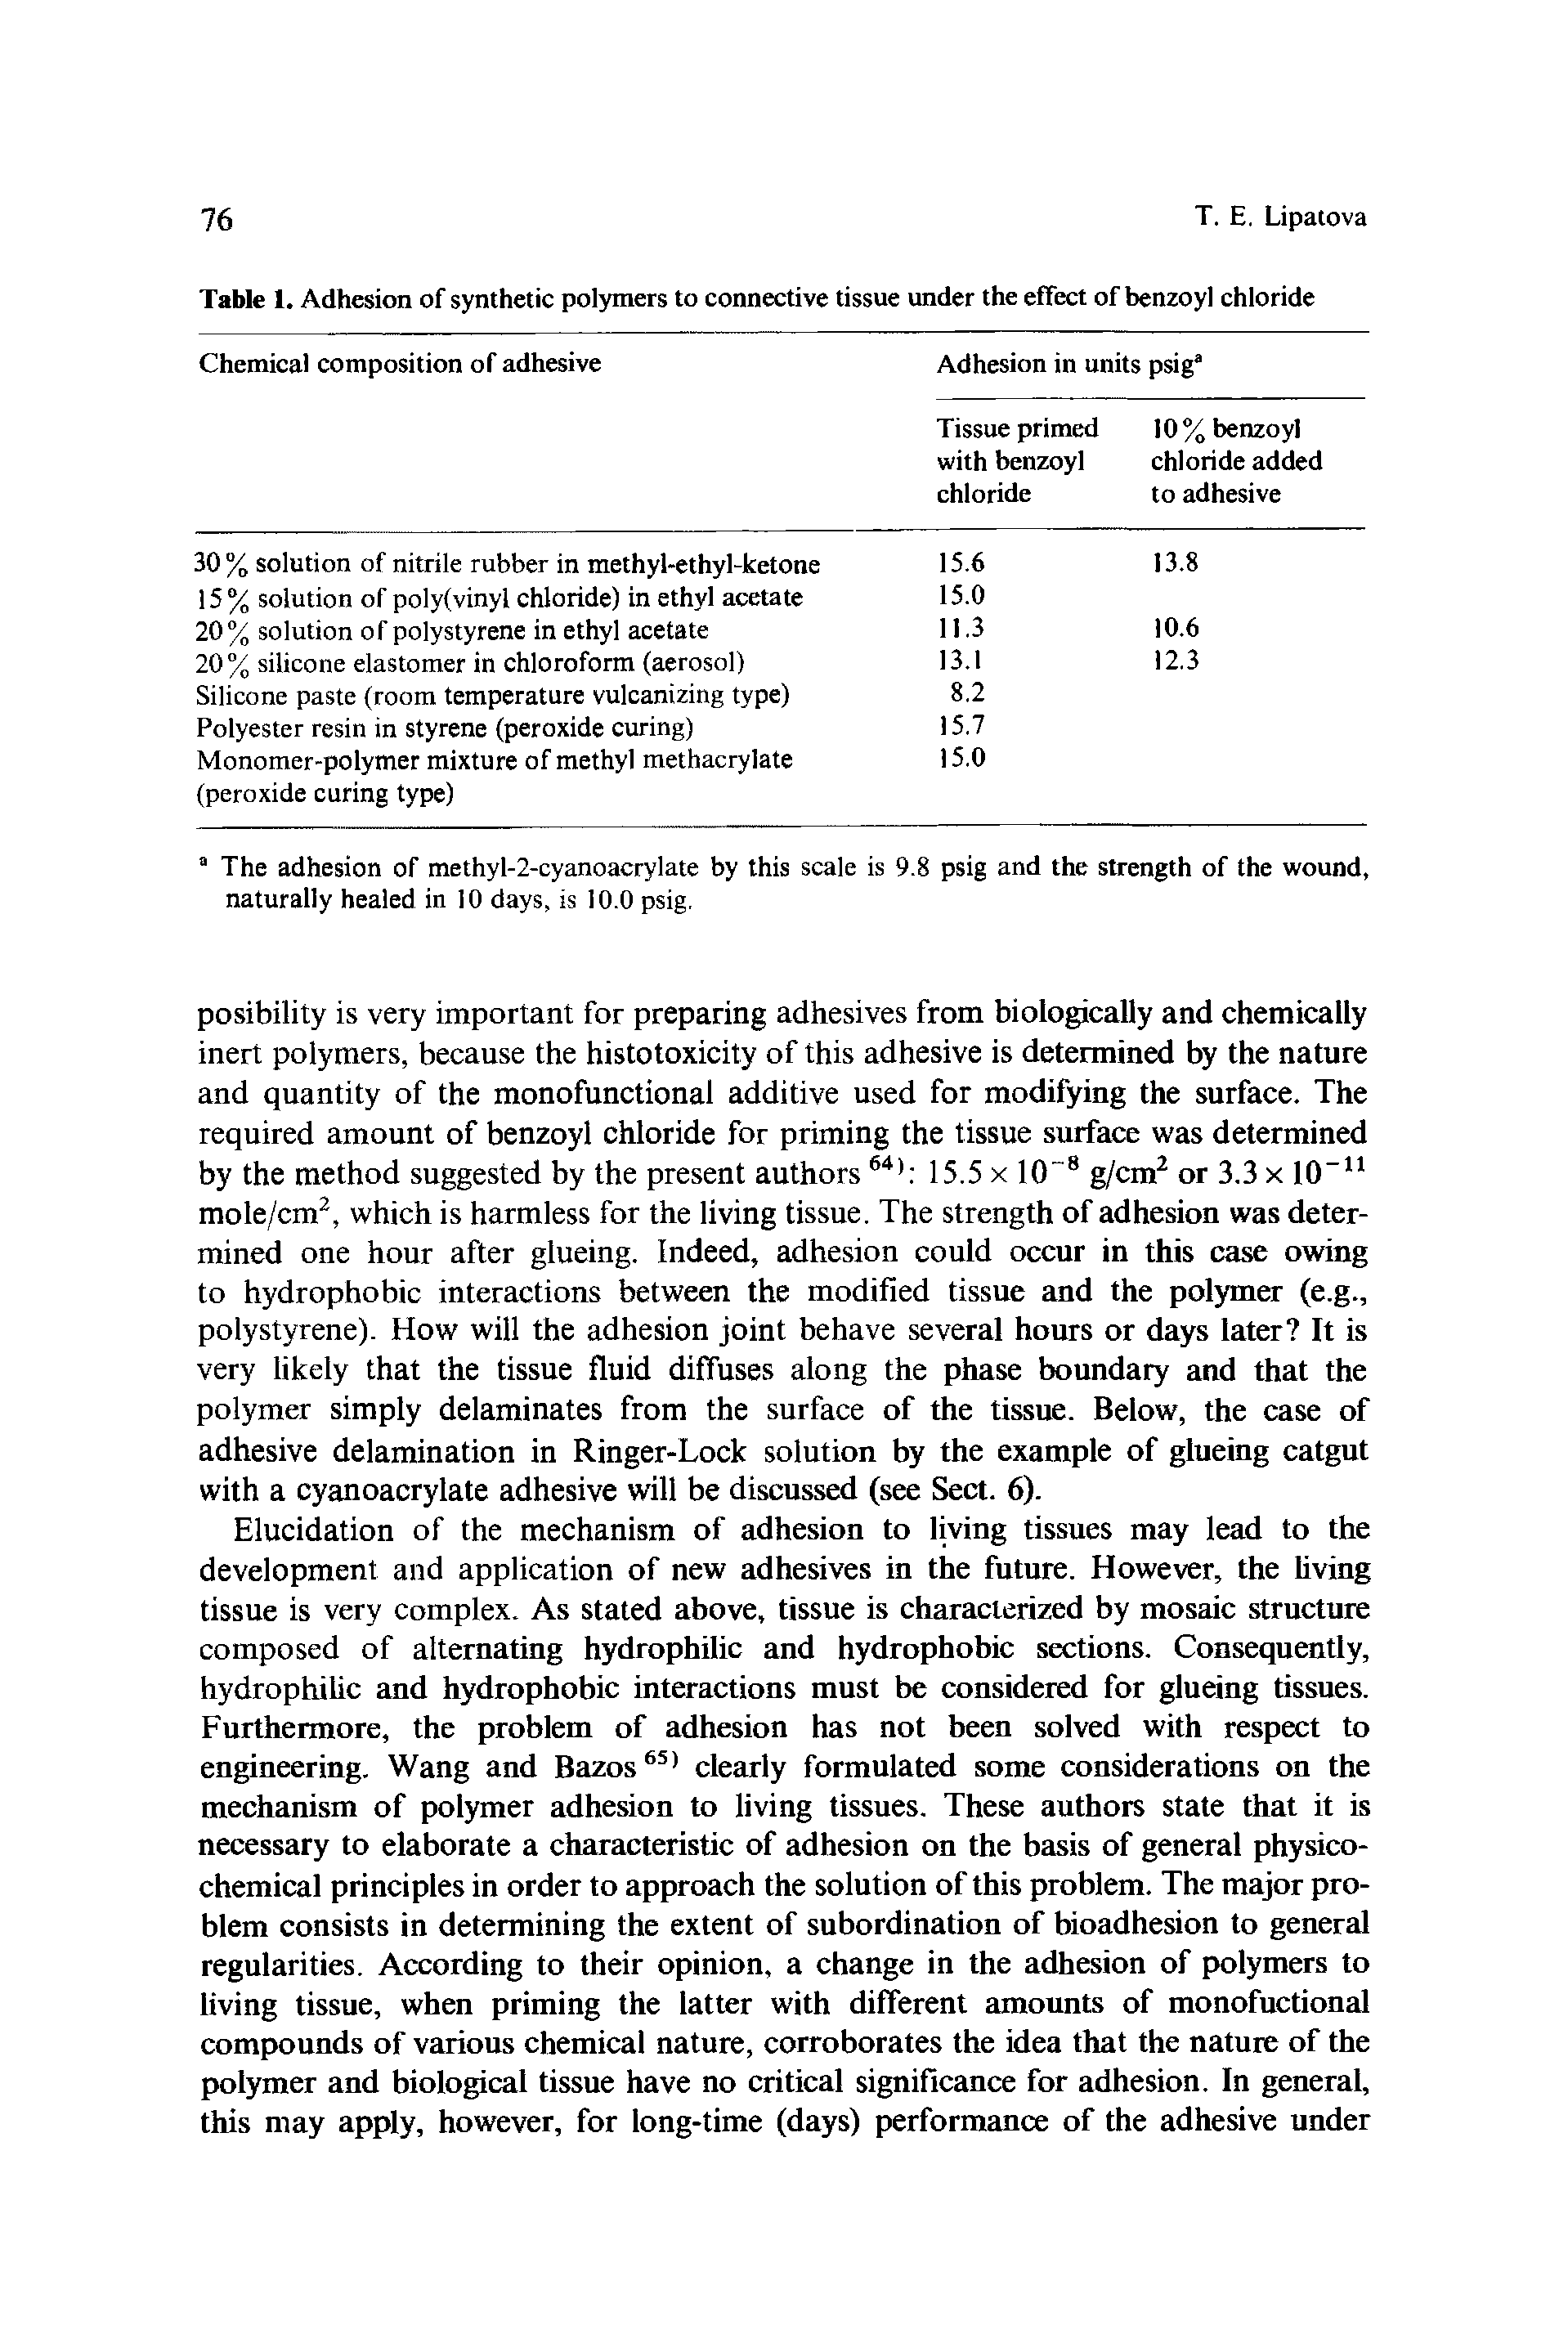 Table 1. Adhesion of synthetic polymers to connective tissue under the effect of benzoyl chloride...